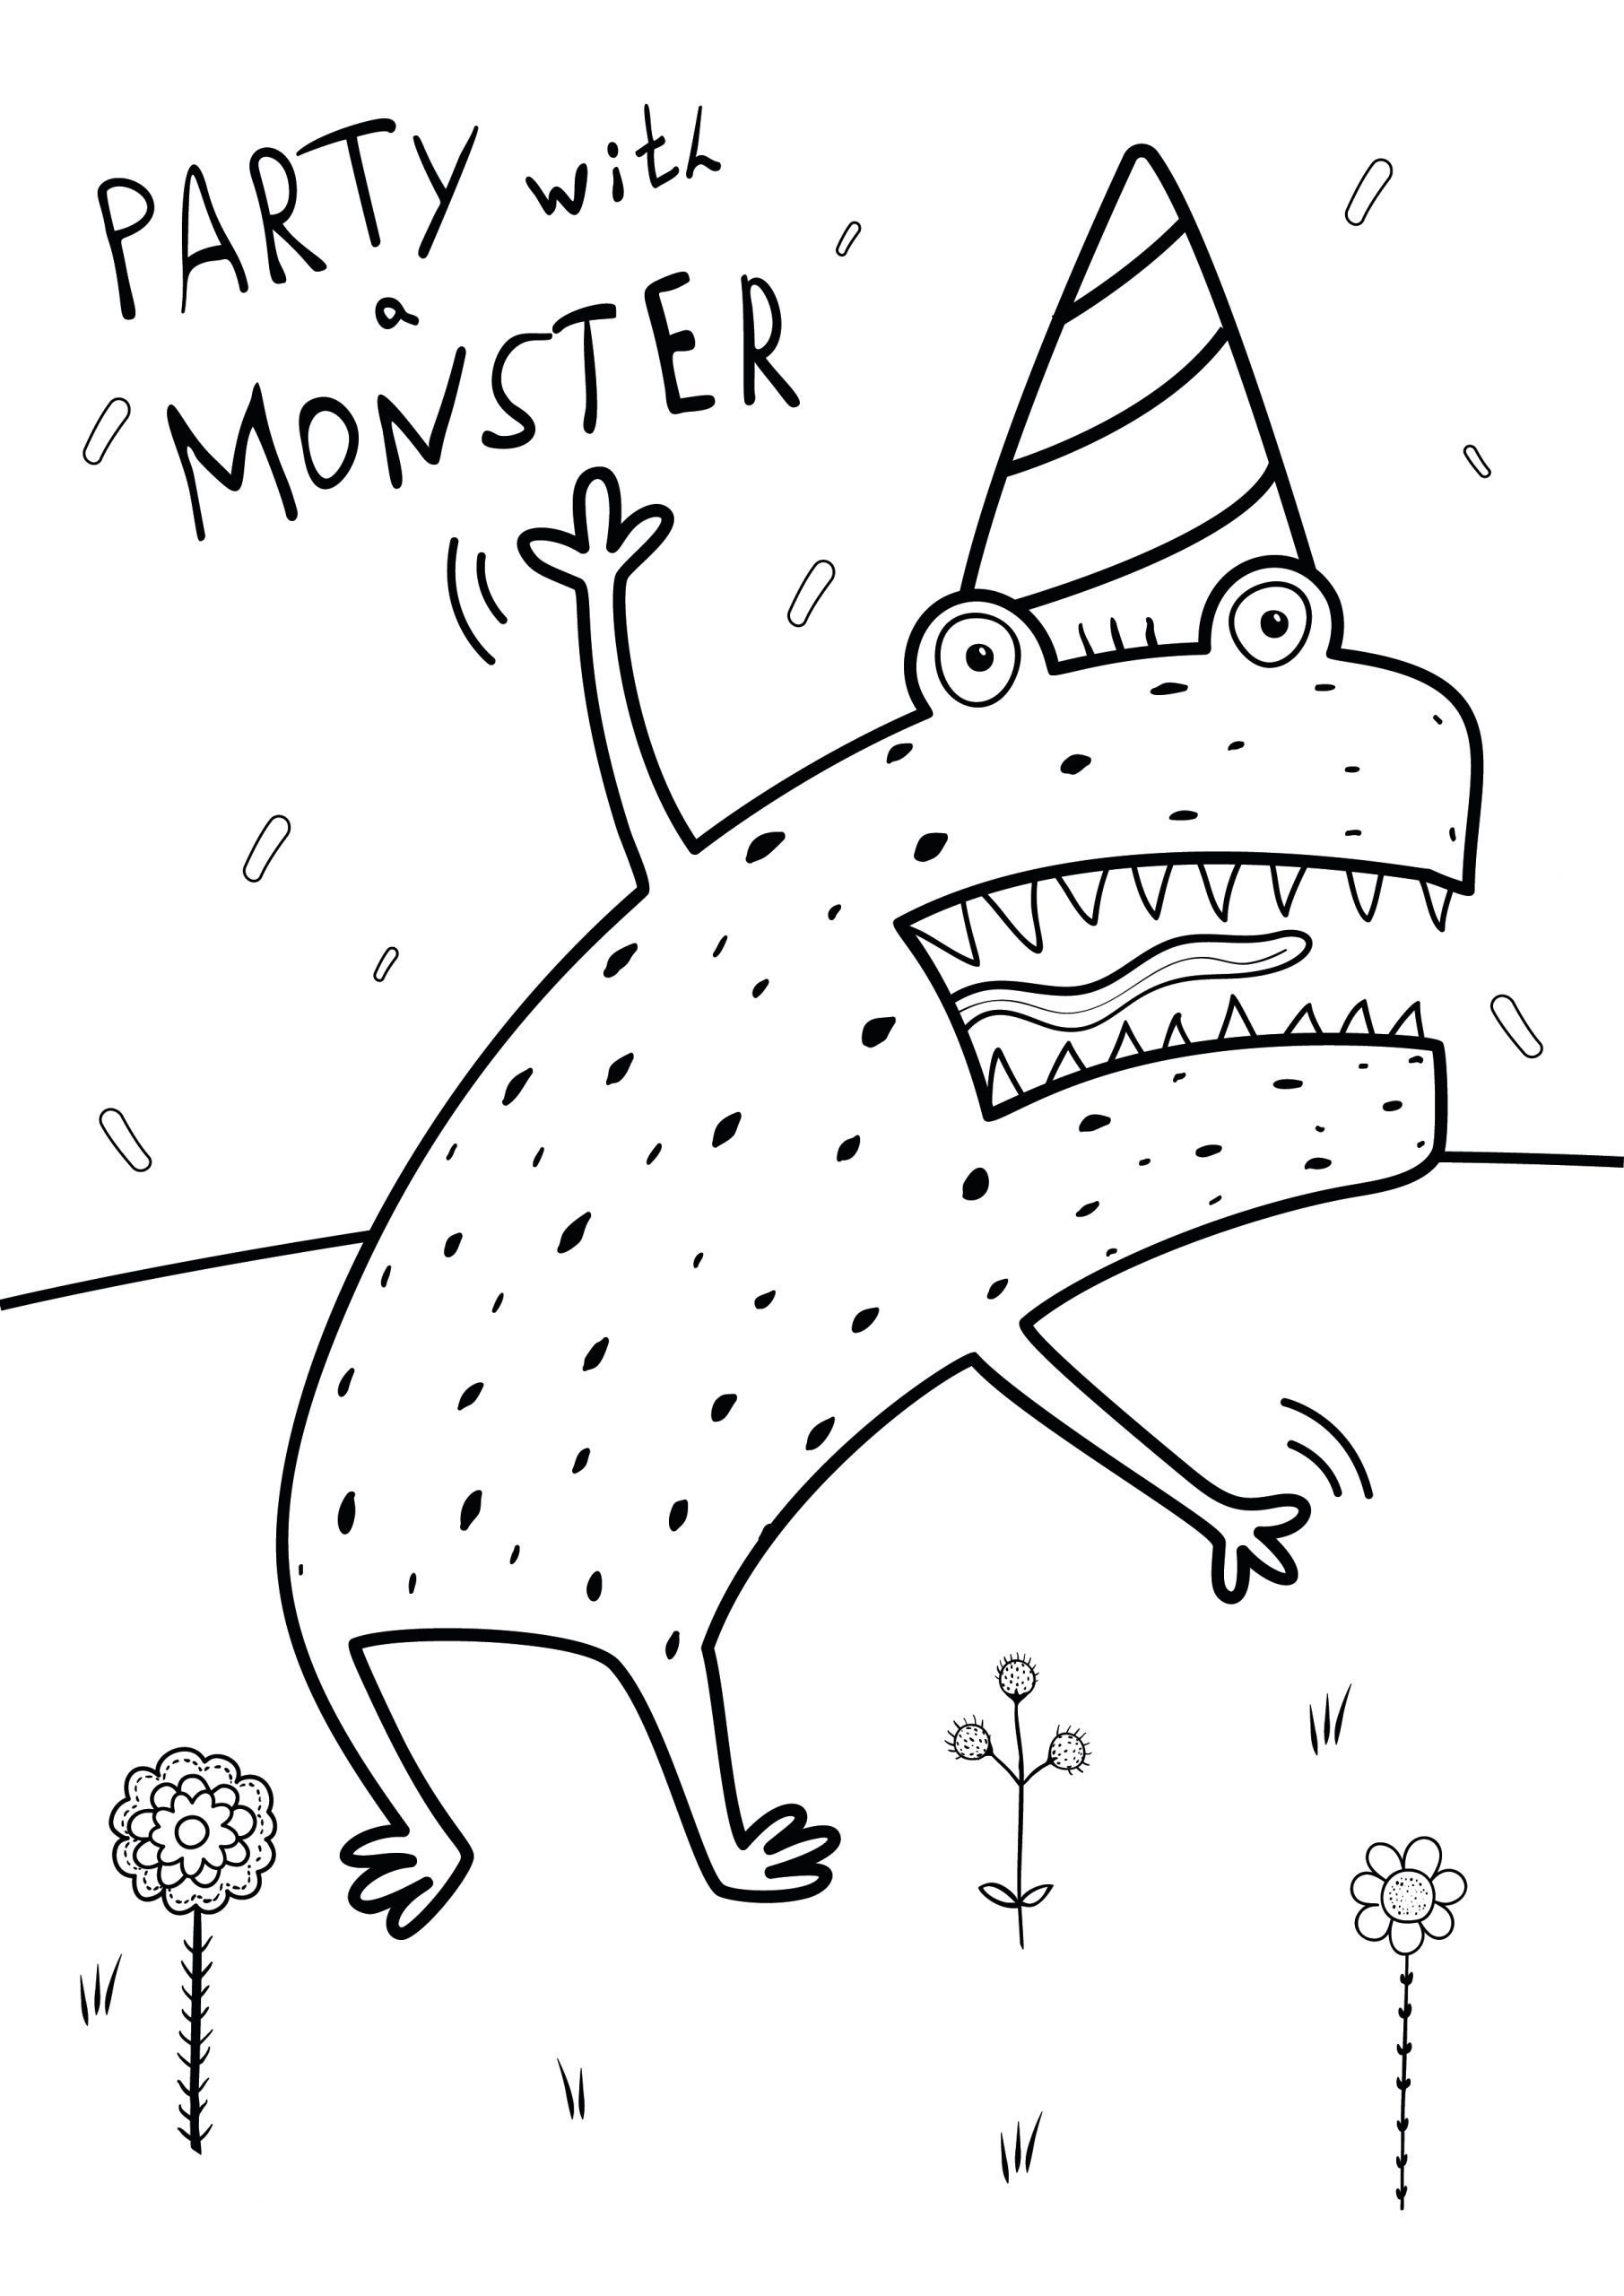 party-monster-colouring-sheet-colouring-crafts